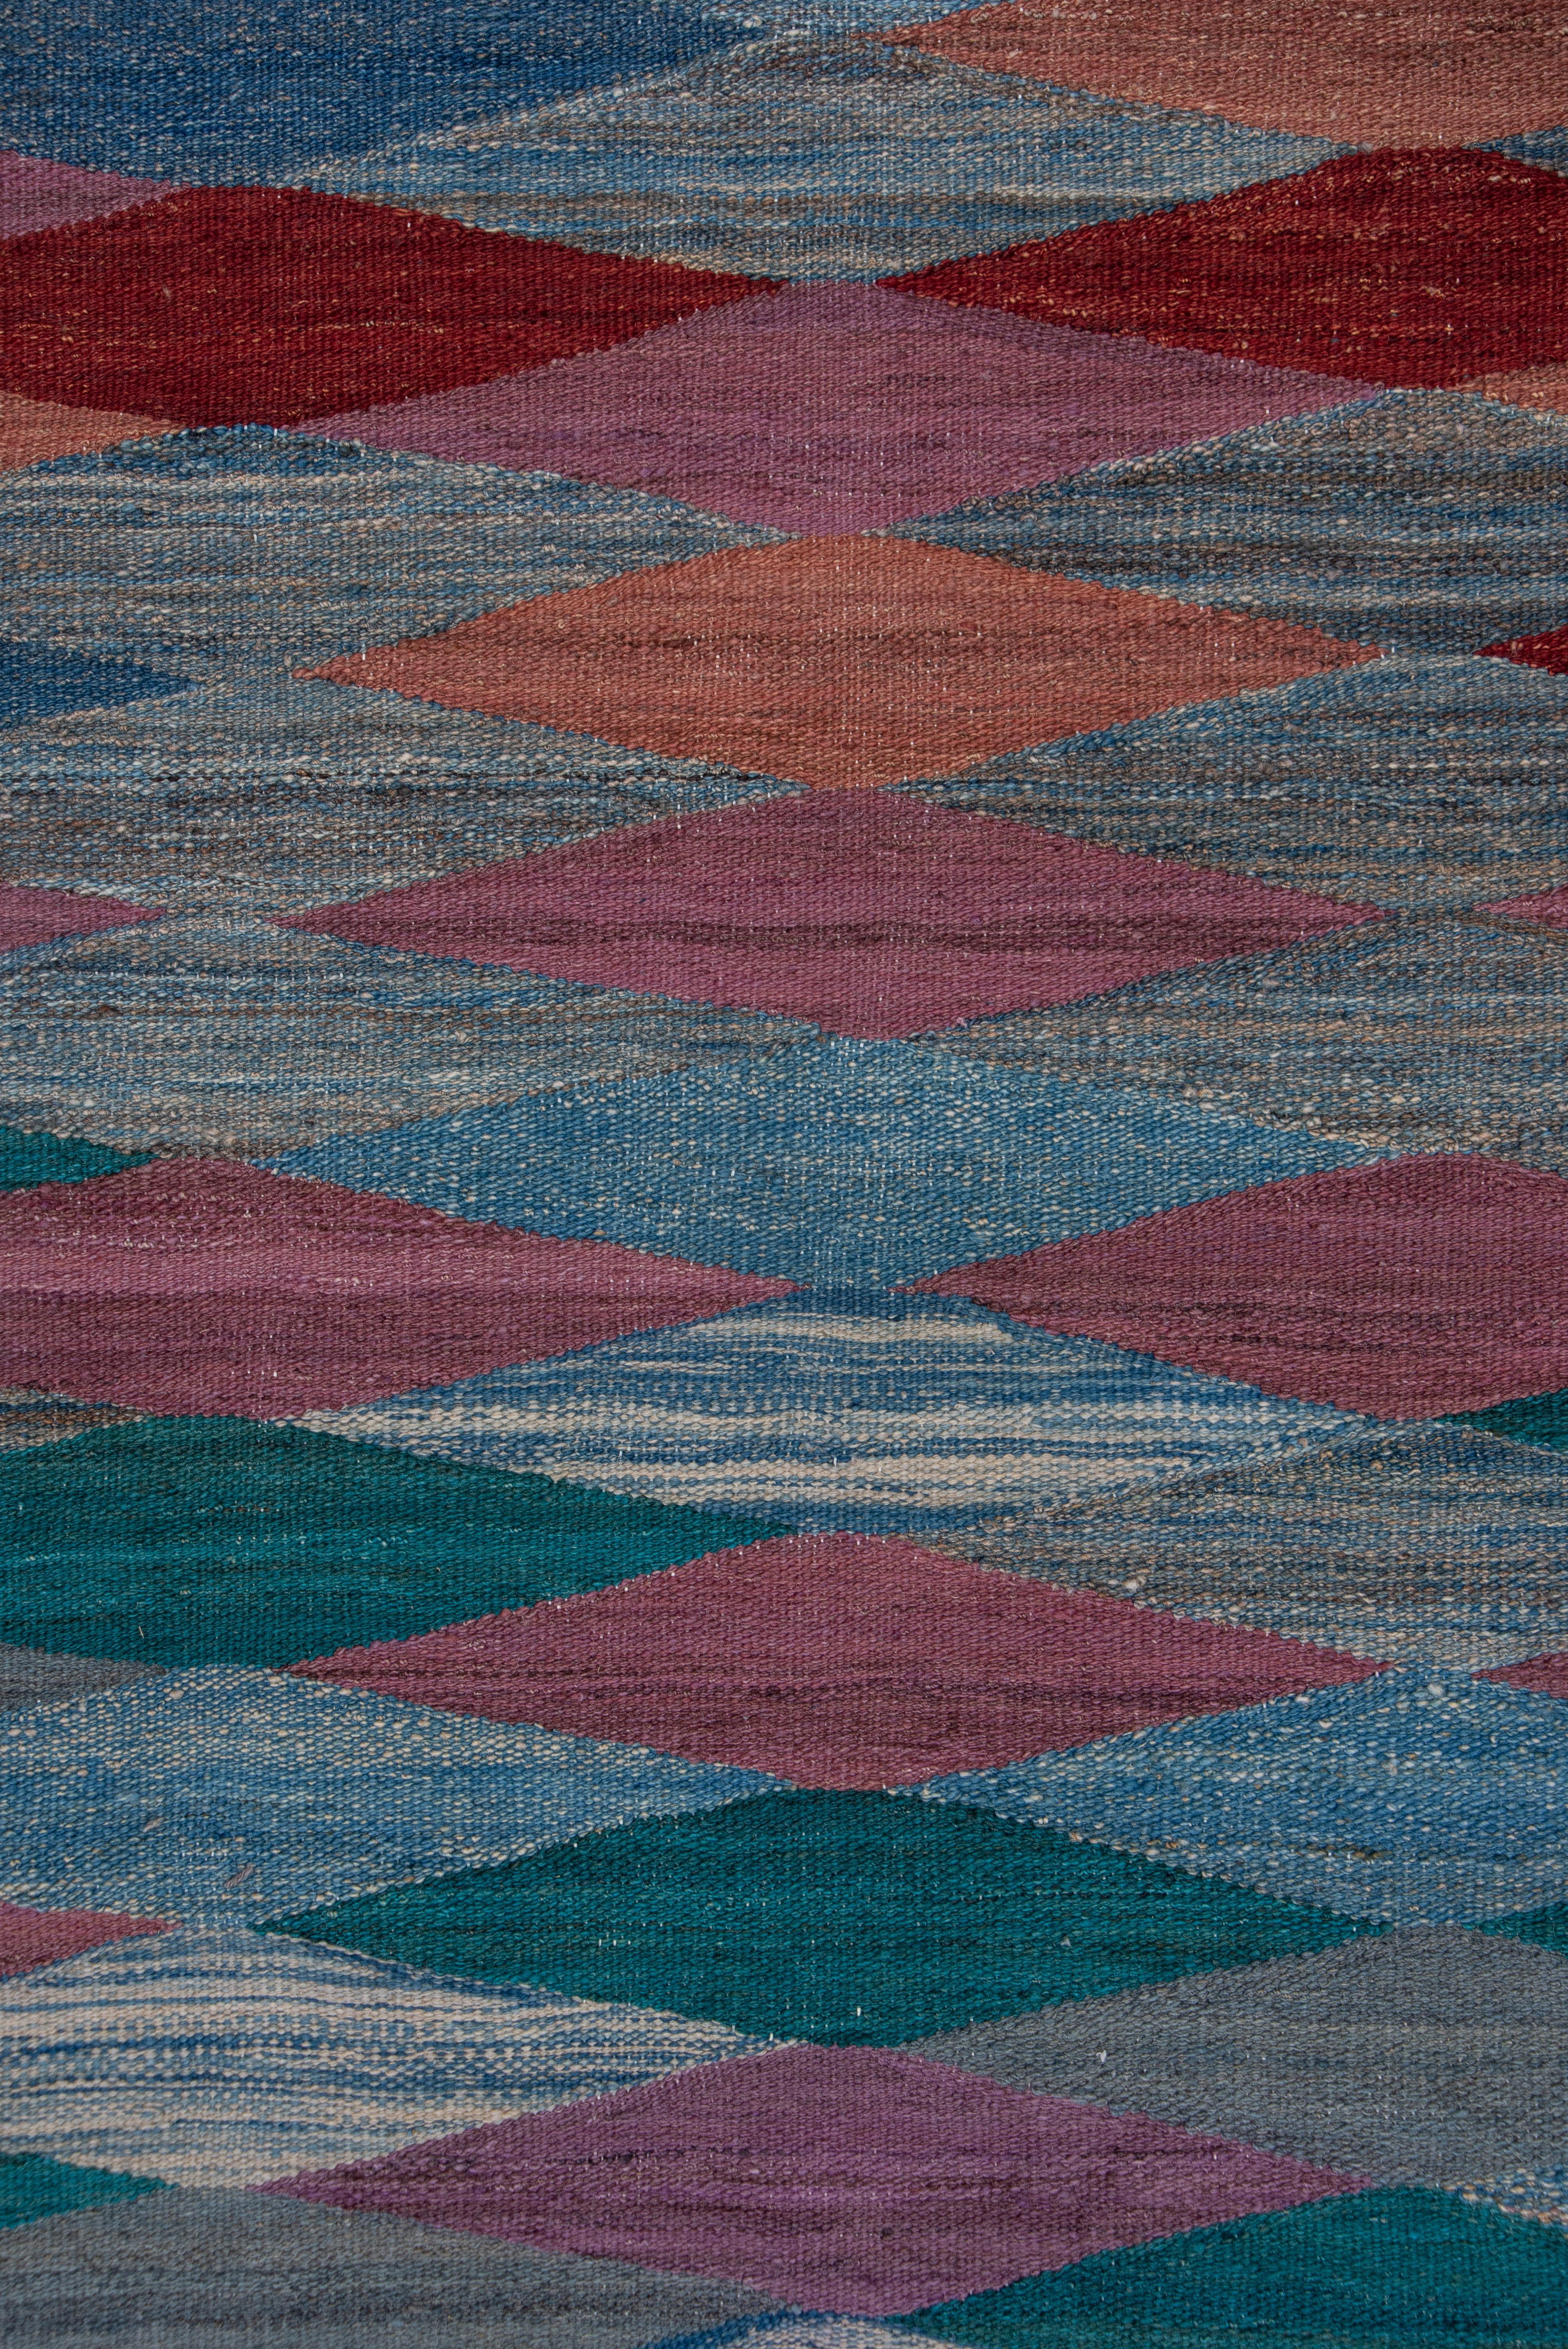 Colorful % Modern Wool Flatweave Area Rug, Diamond and Wave Design In Excellent Condition For Sale In New York, NY